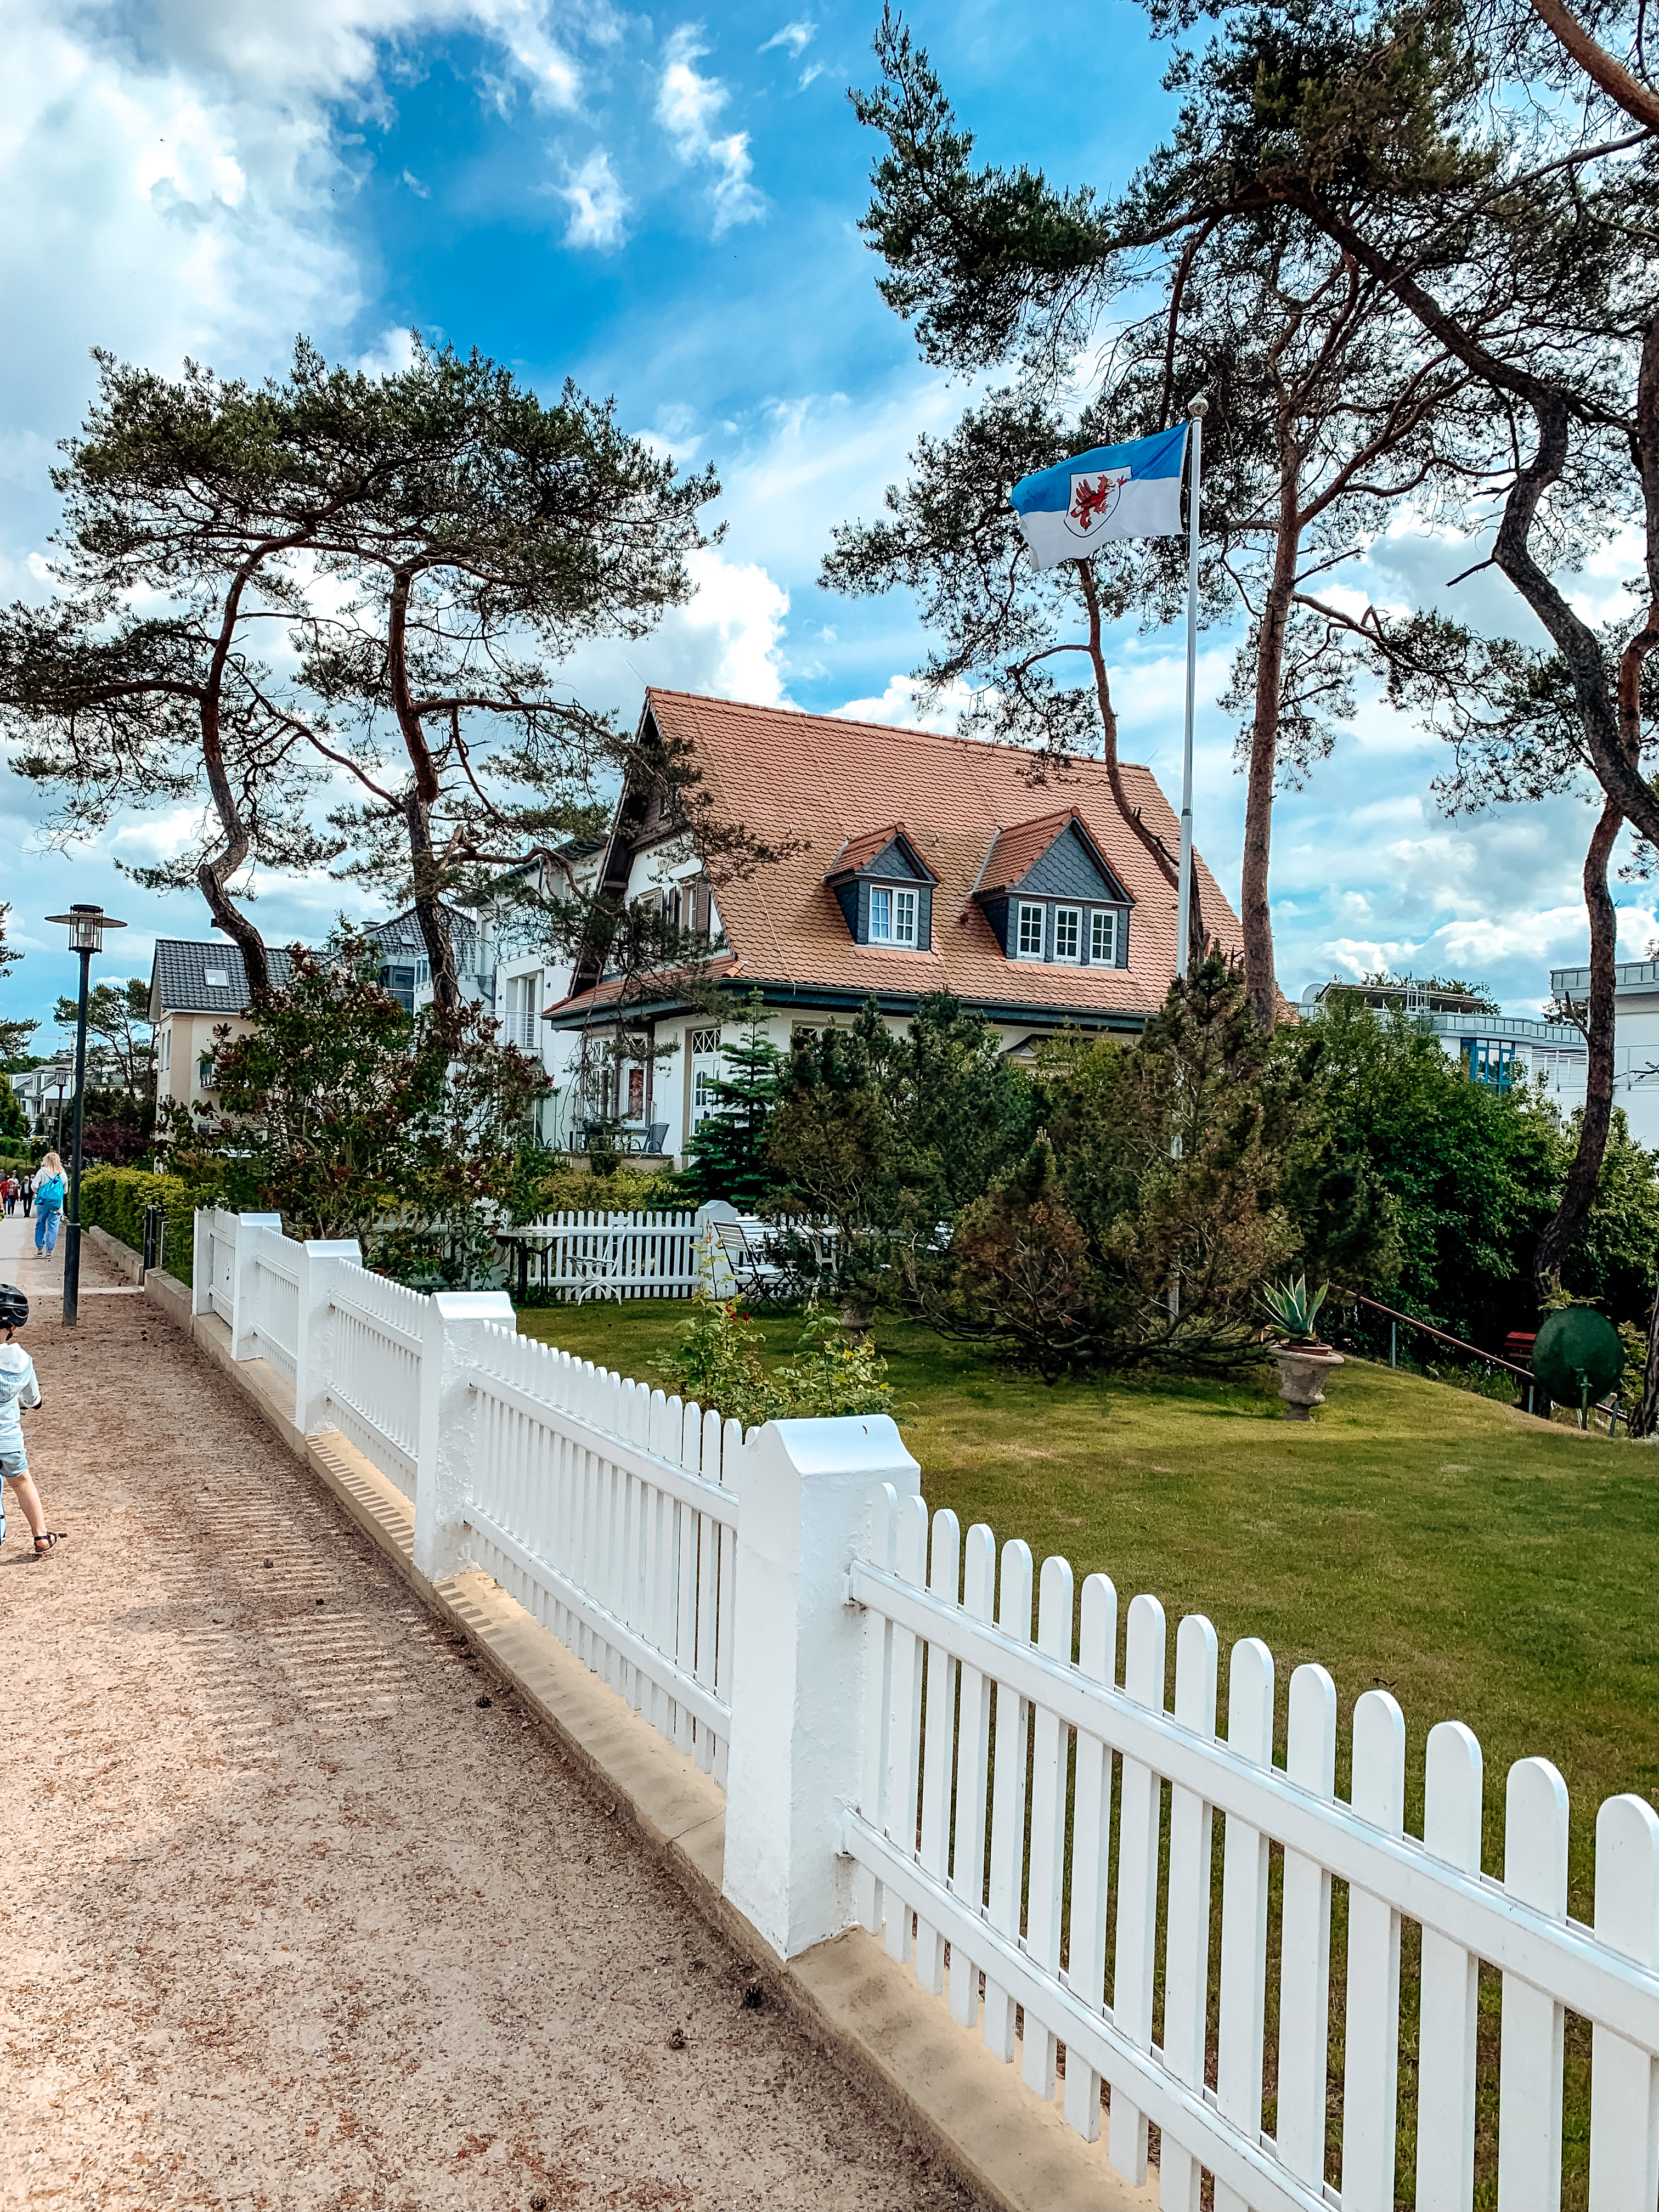 Heutiges Sonderangebot Sommerzeit: A Time Girl One to German Insel Usedom… for Travel American – to Germans